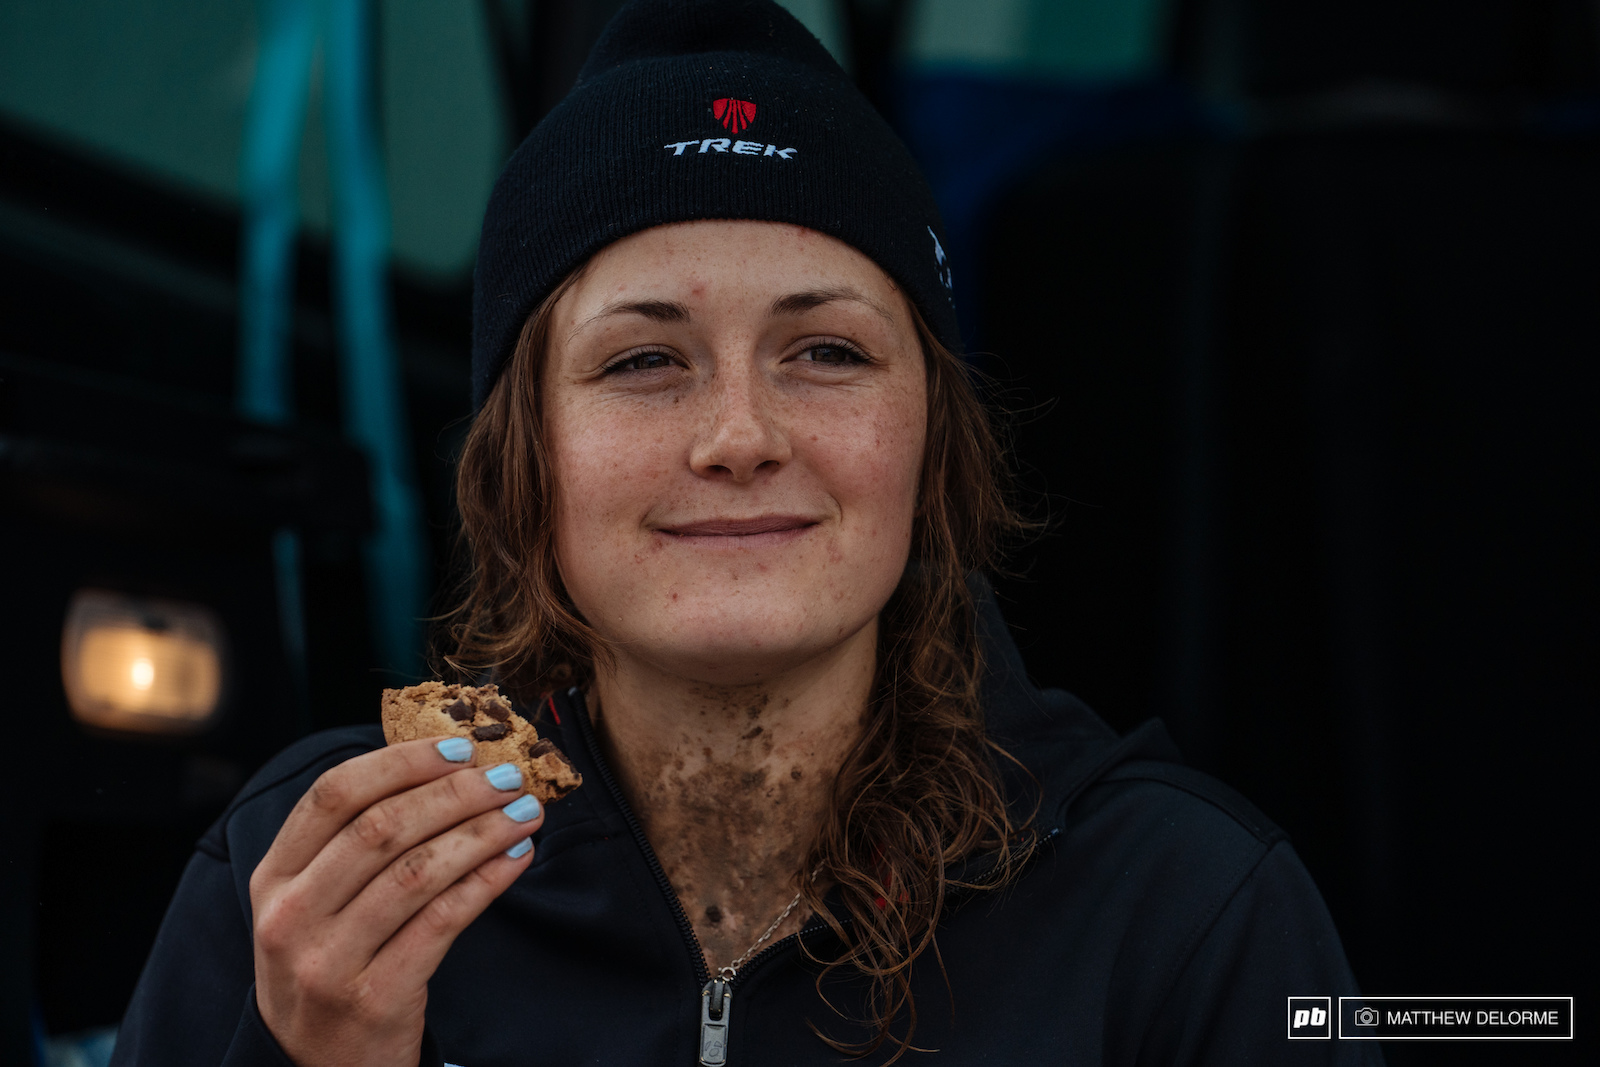 It's the little things. Like cookies after a brutal day out racing.